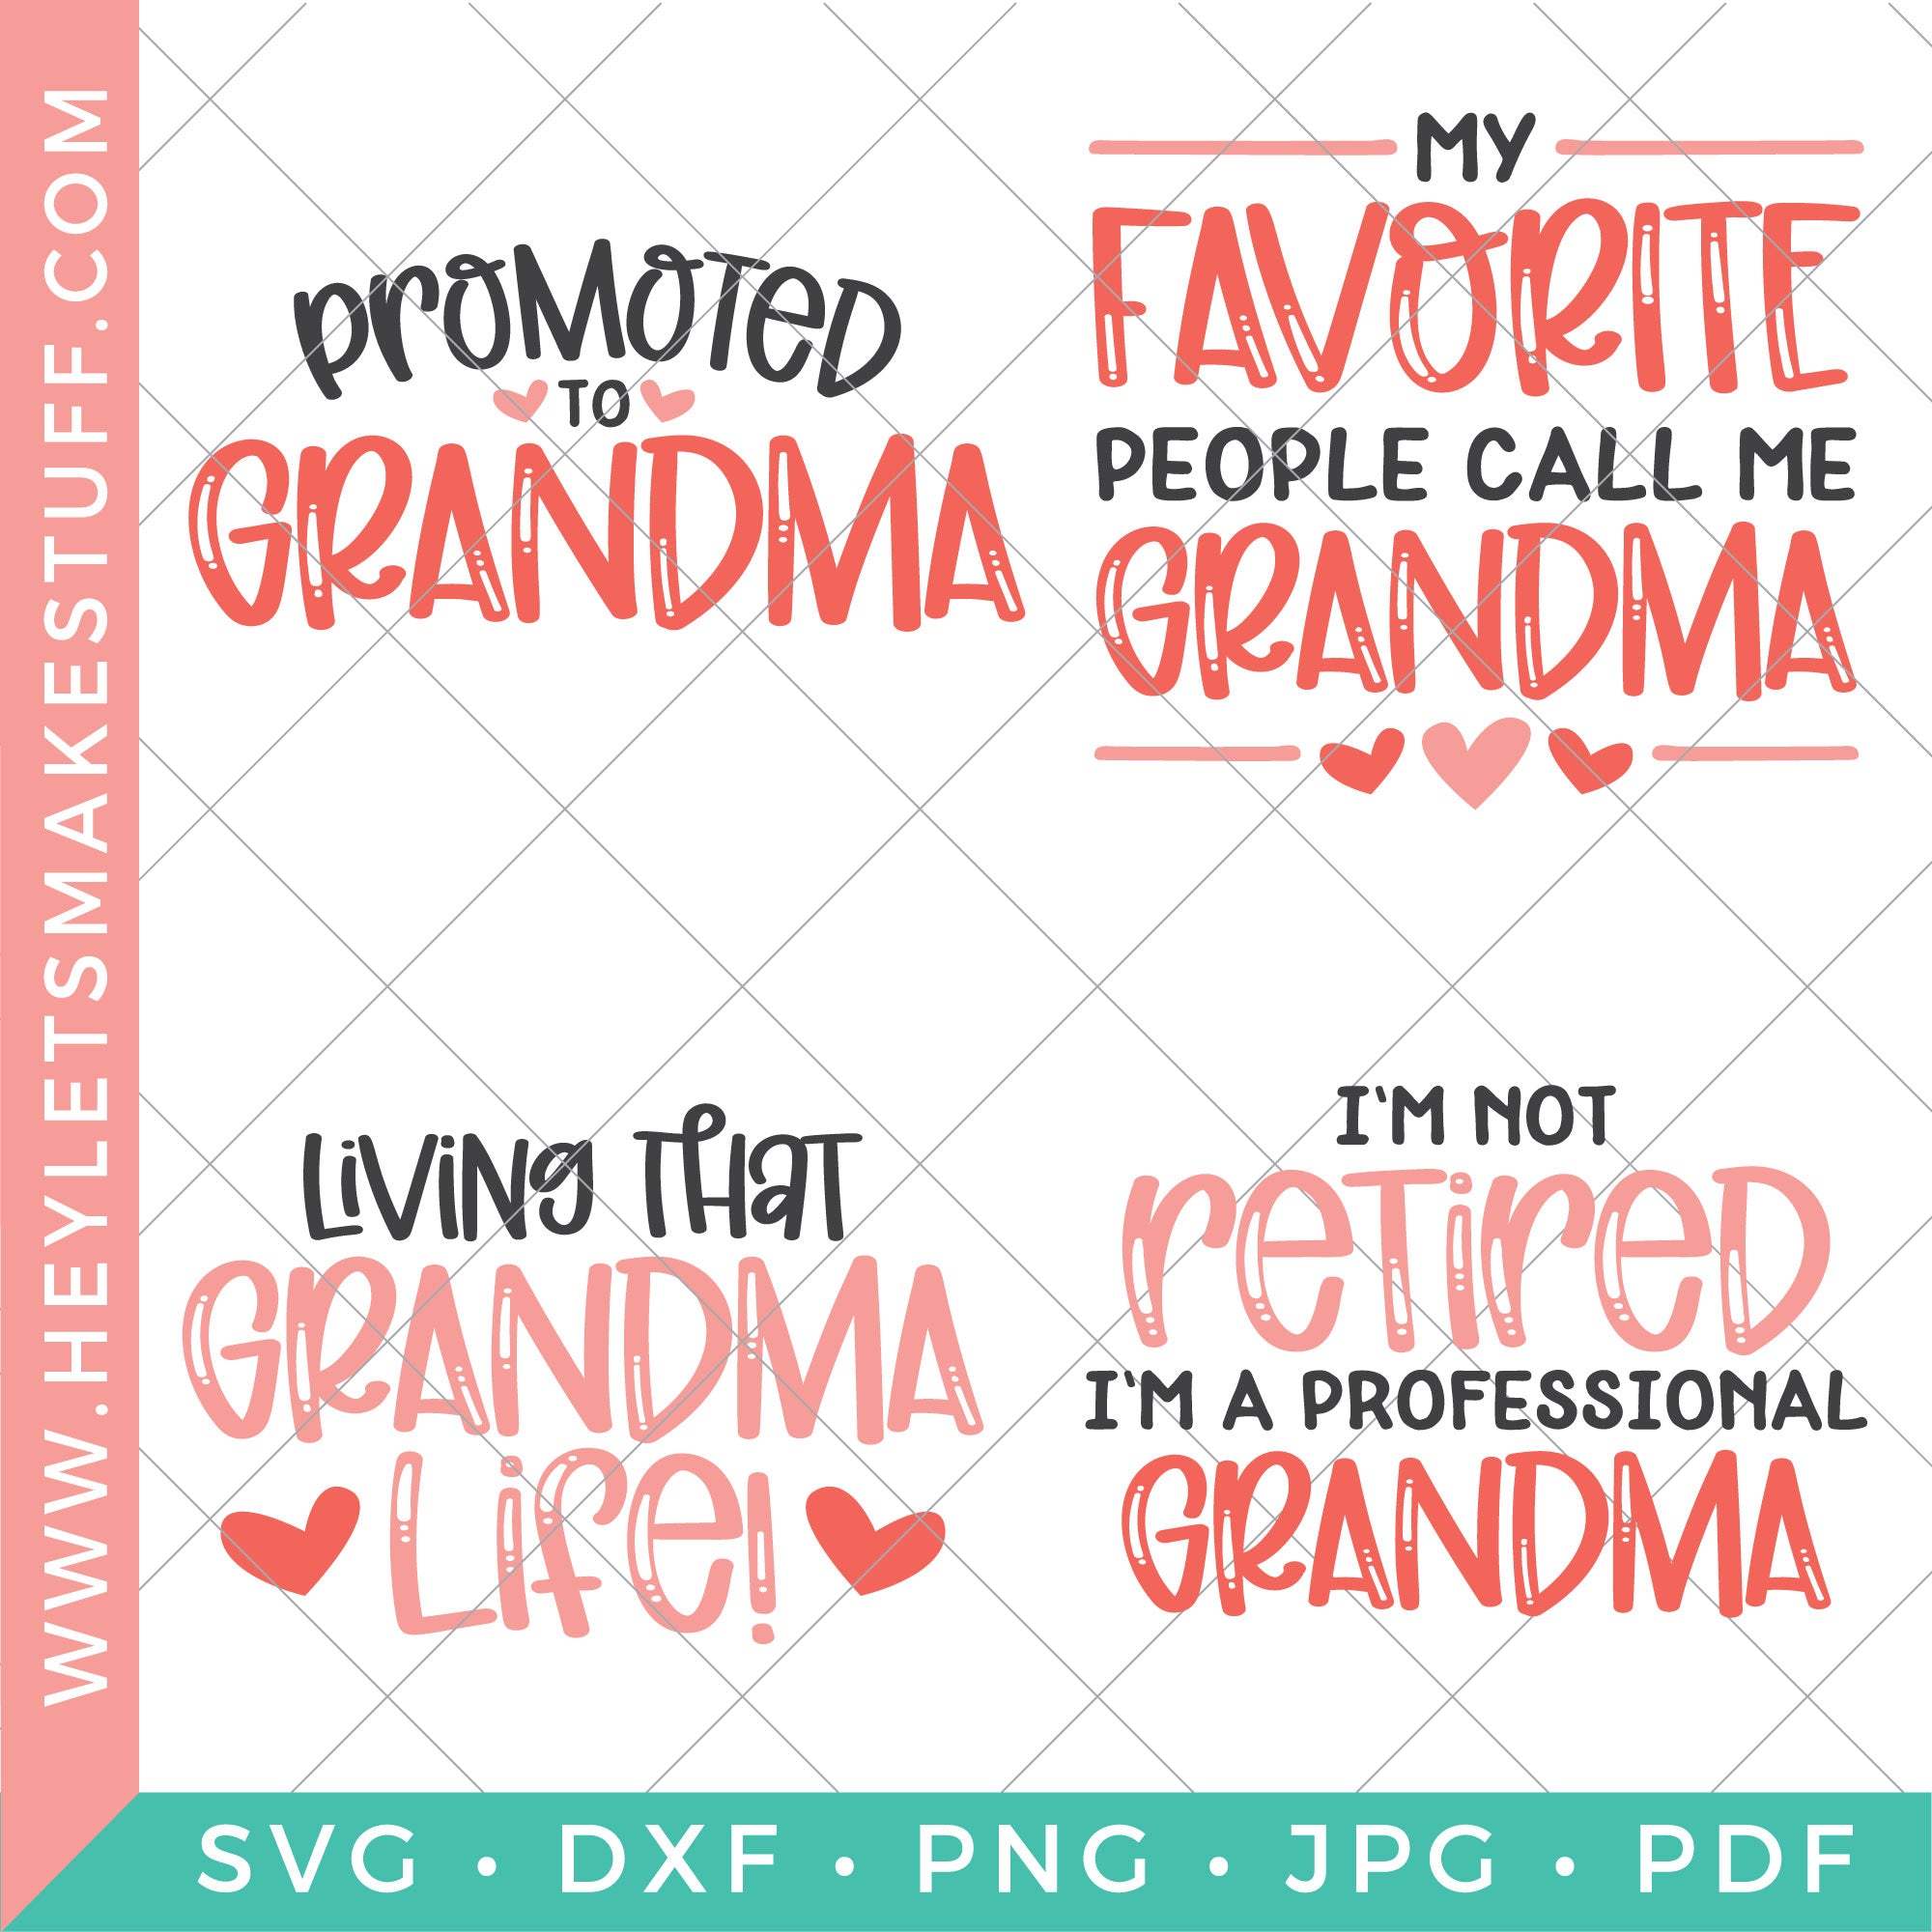 Grandparents Svg Files To Show Your Love For The Grandparents